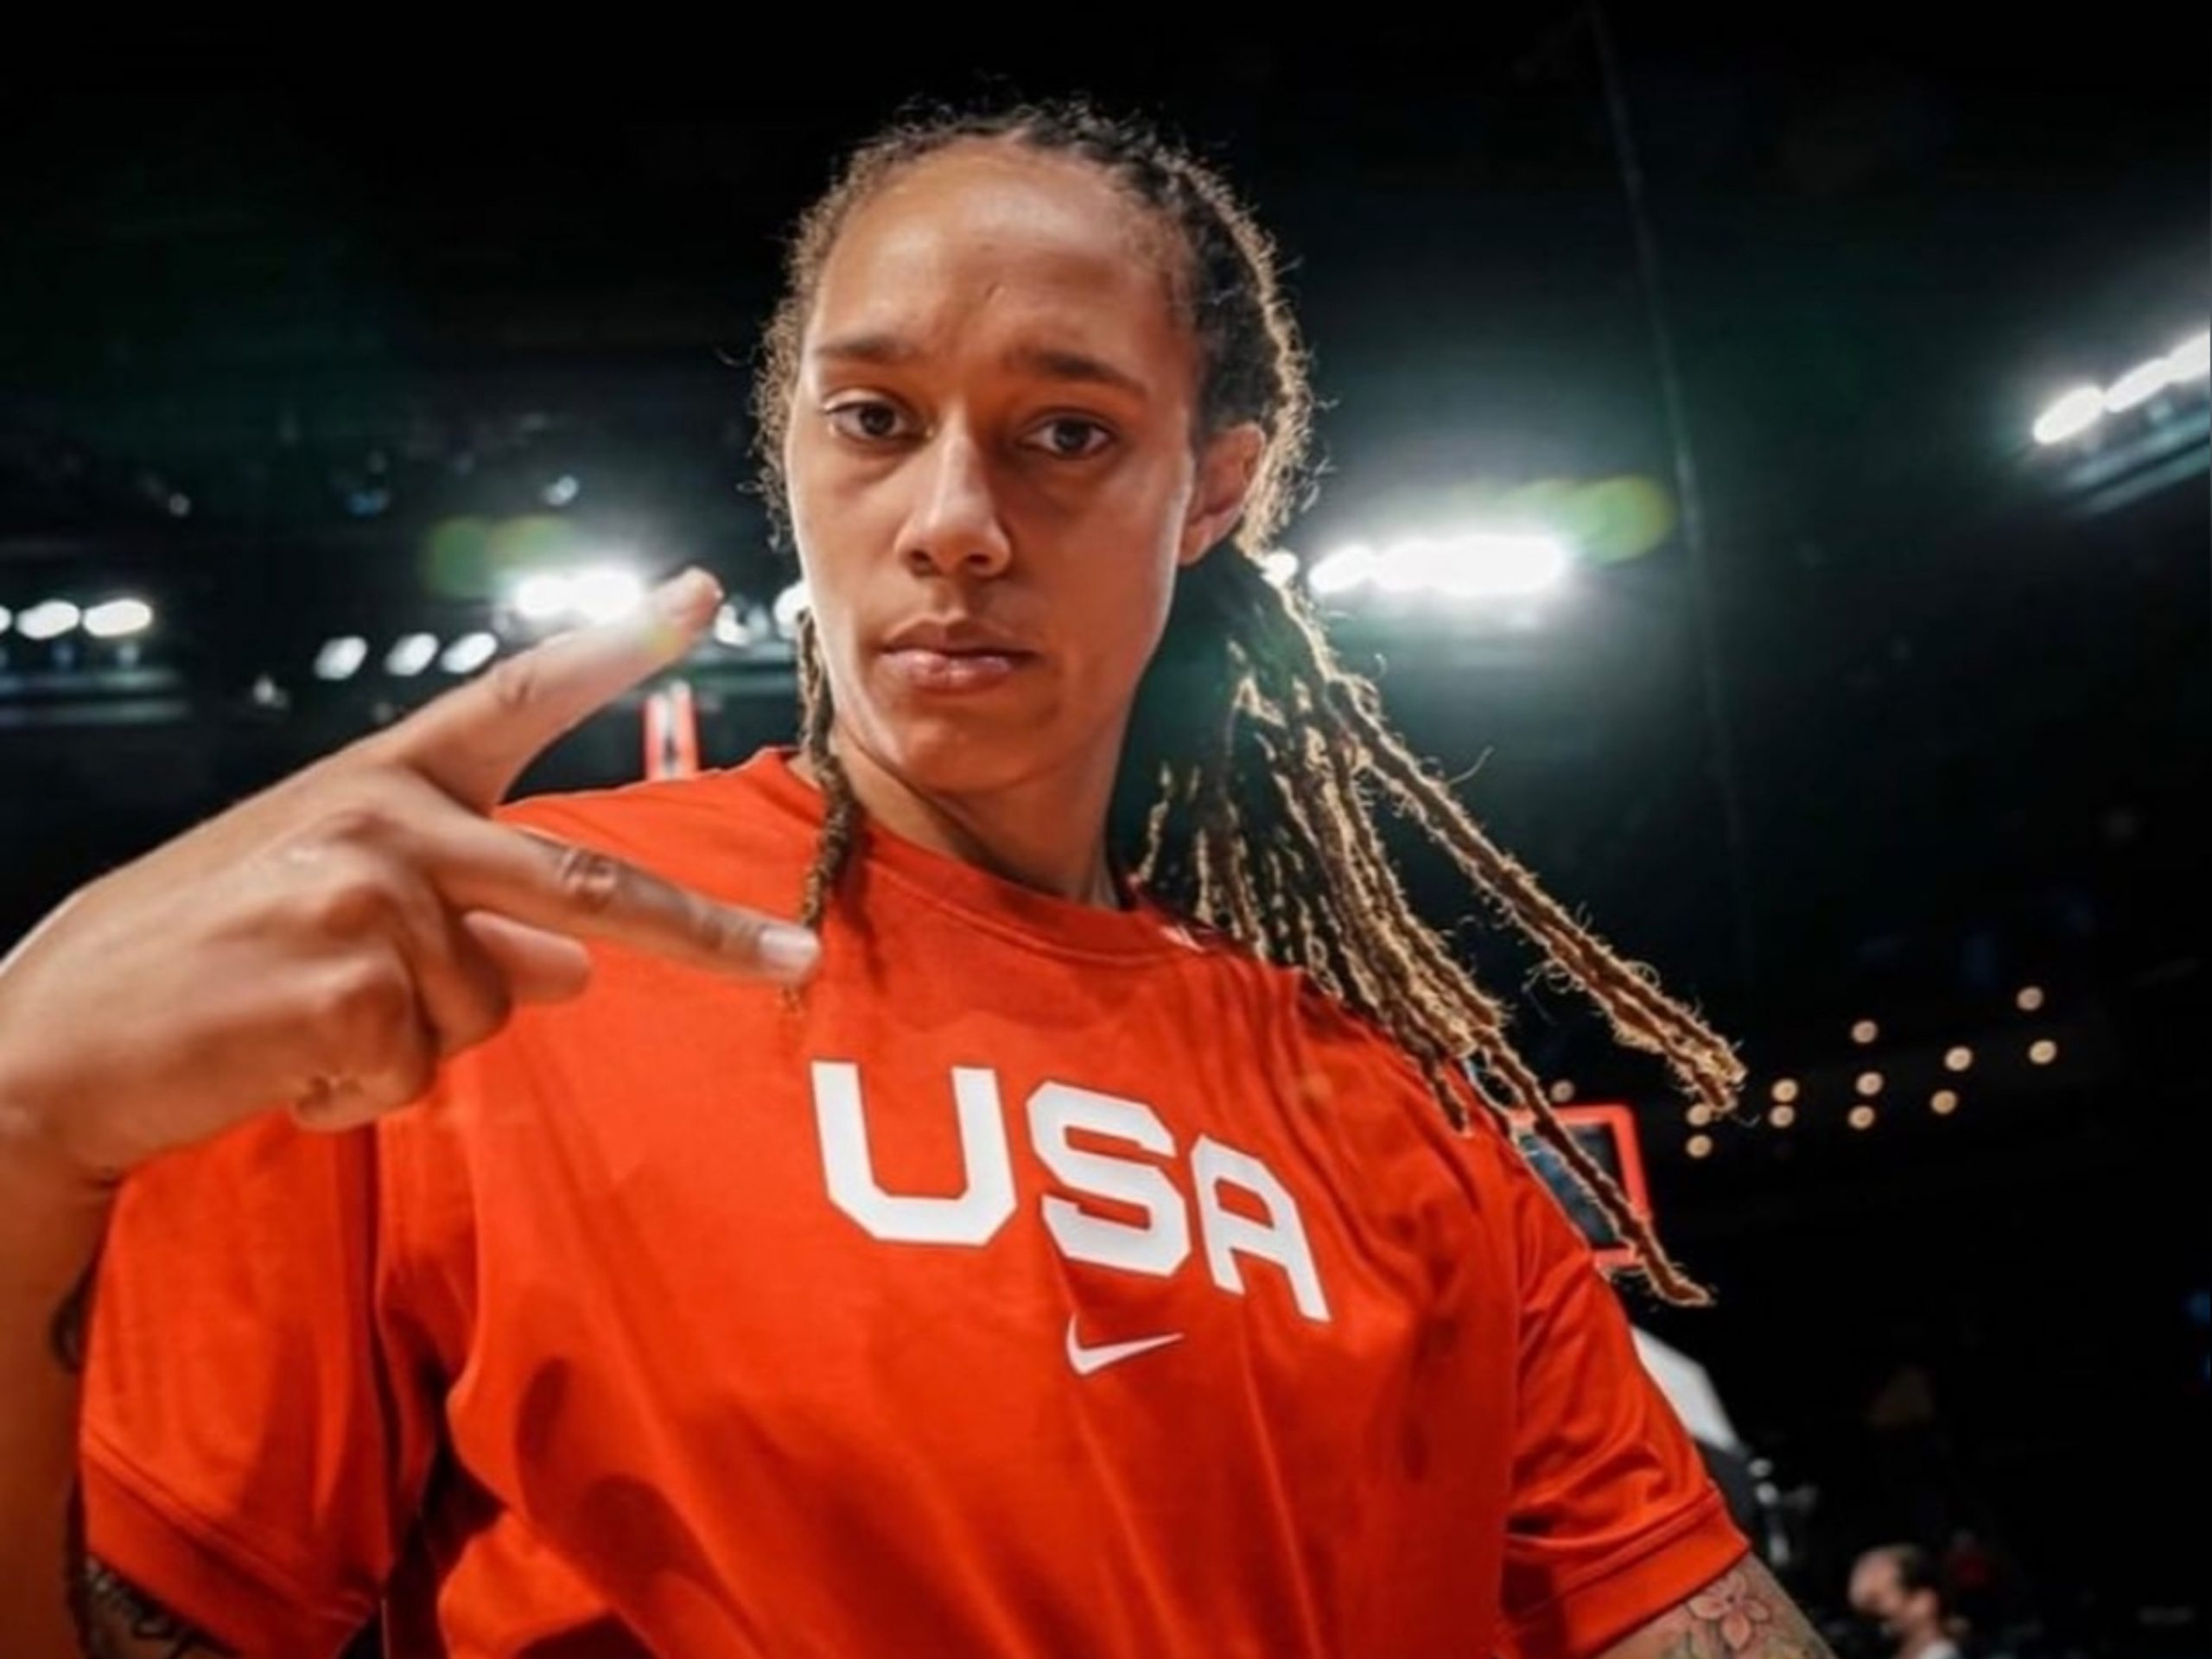 Brittney Griner Released From Russian Prison